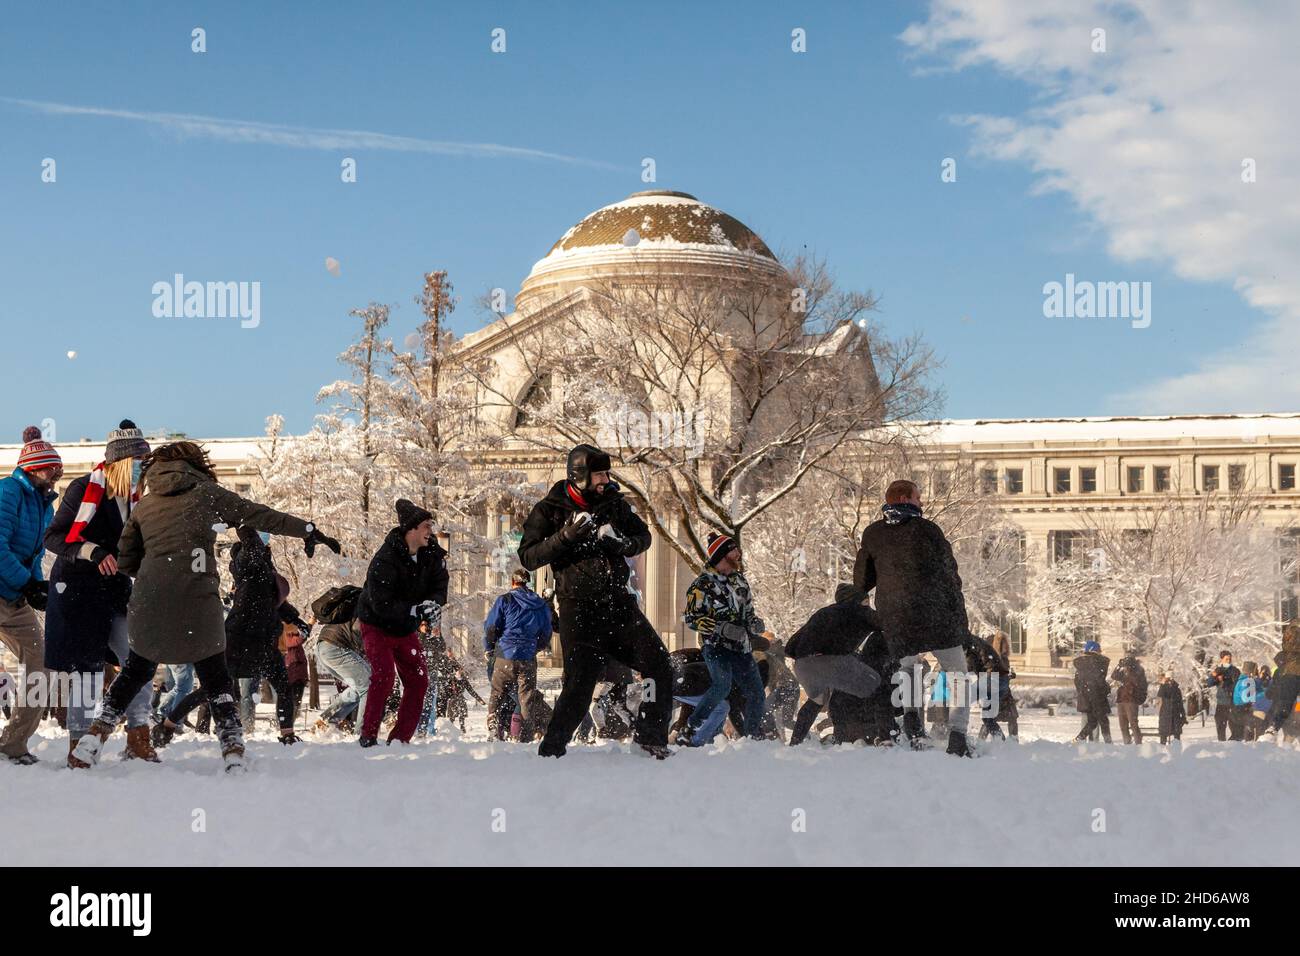 Washington, DC, USA, 3 January 2022.  Pictured: People engage in a huge snowball fight on the National Mall in front of the National Museum of Natural History after an unexpected snowstorm dumped roughly 8 inches on snow on Washington, DC.  The fight was announced by the DC Snowball Fight Association.  Credit: Allison Bailey / Alamy Live News Stock Photo